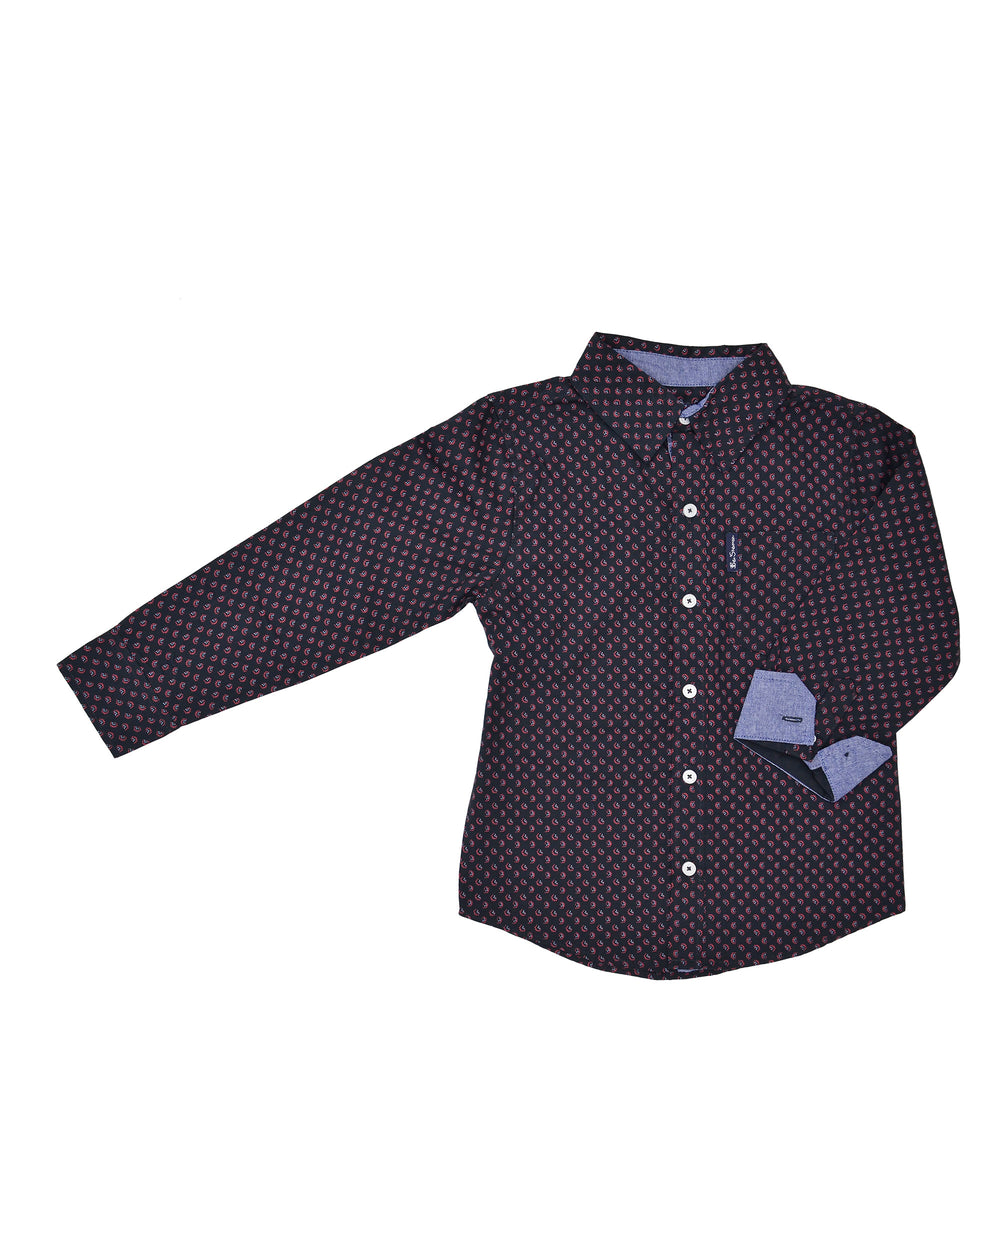 Boys' Black with Red Printed Button-Down Shirt (Sizes 4-7)